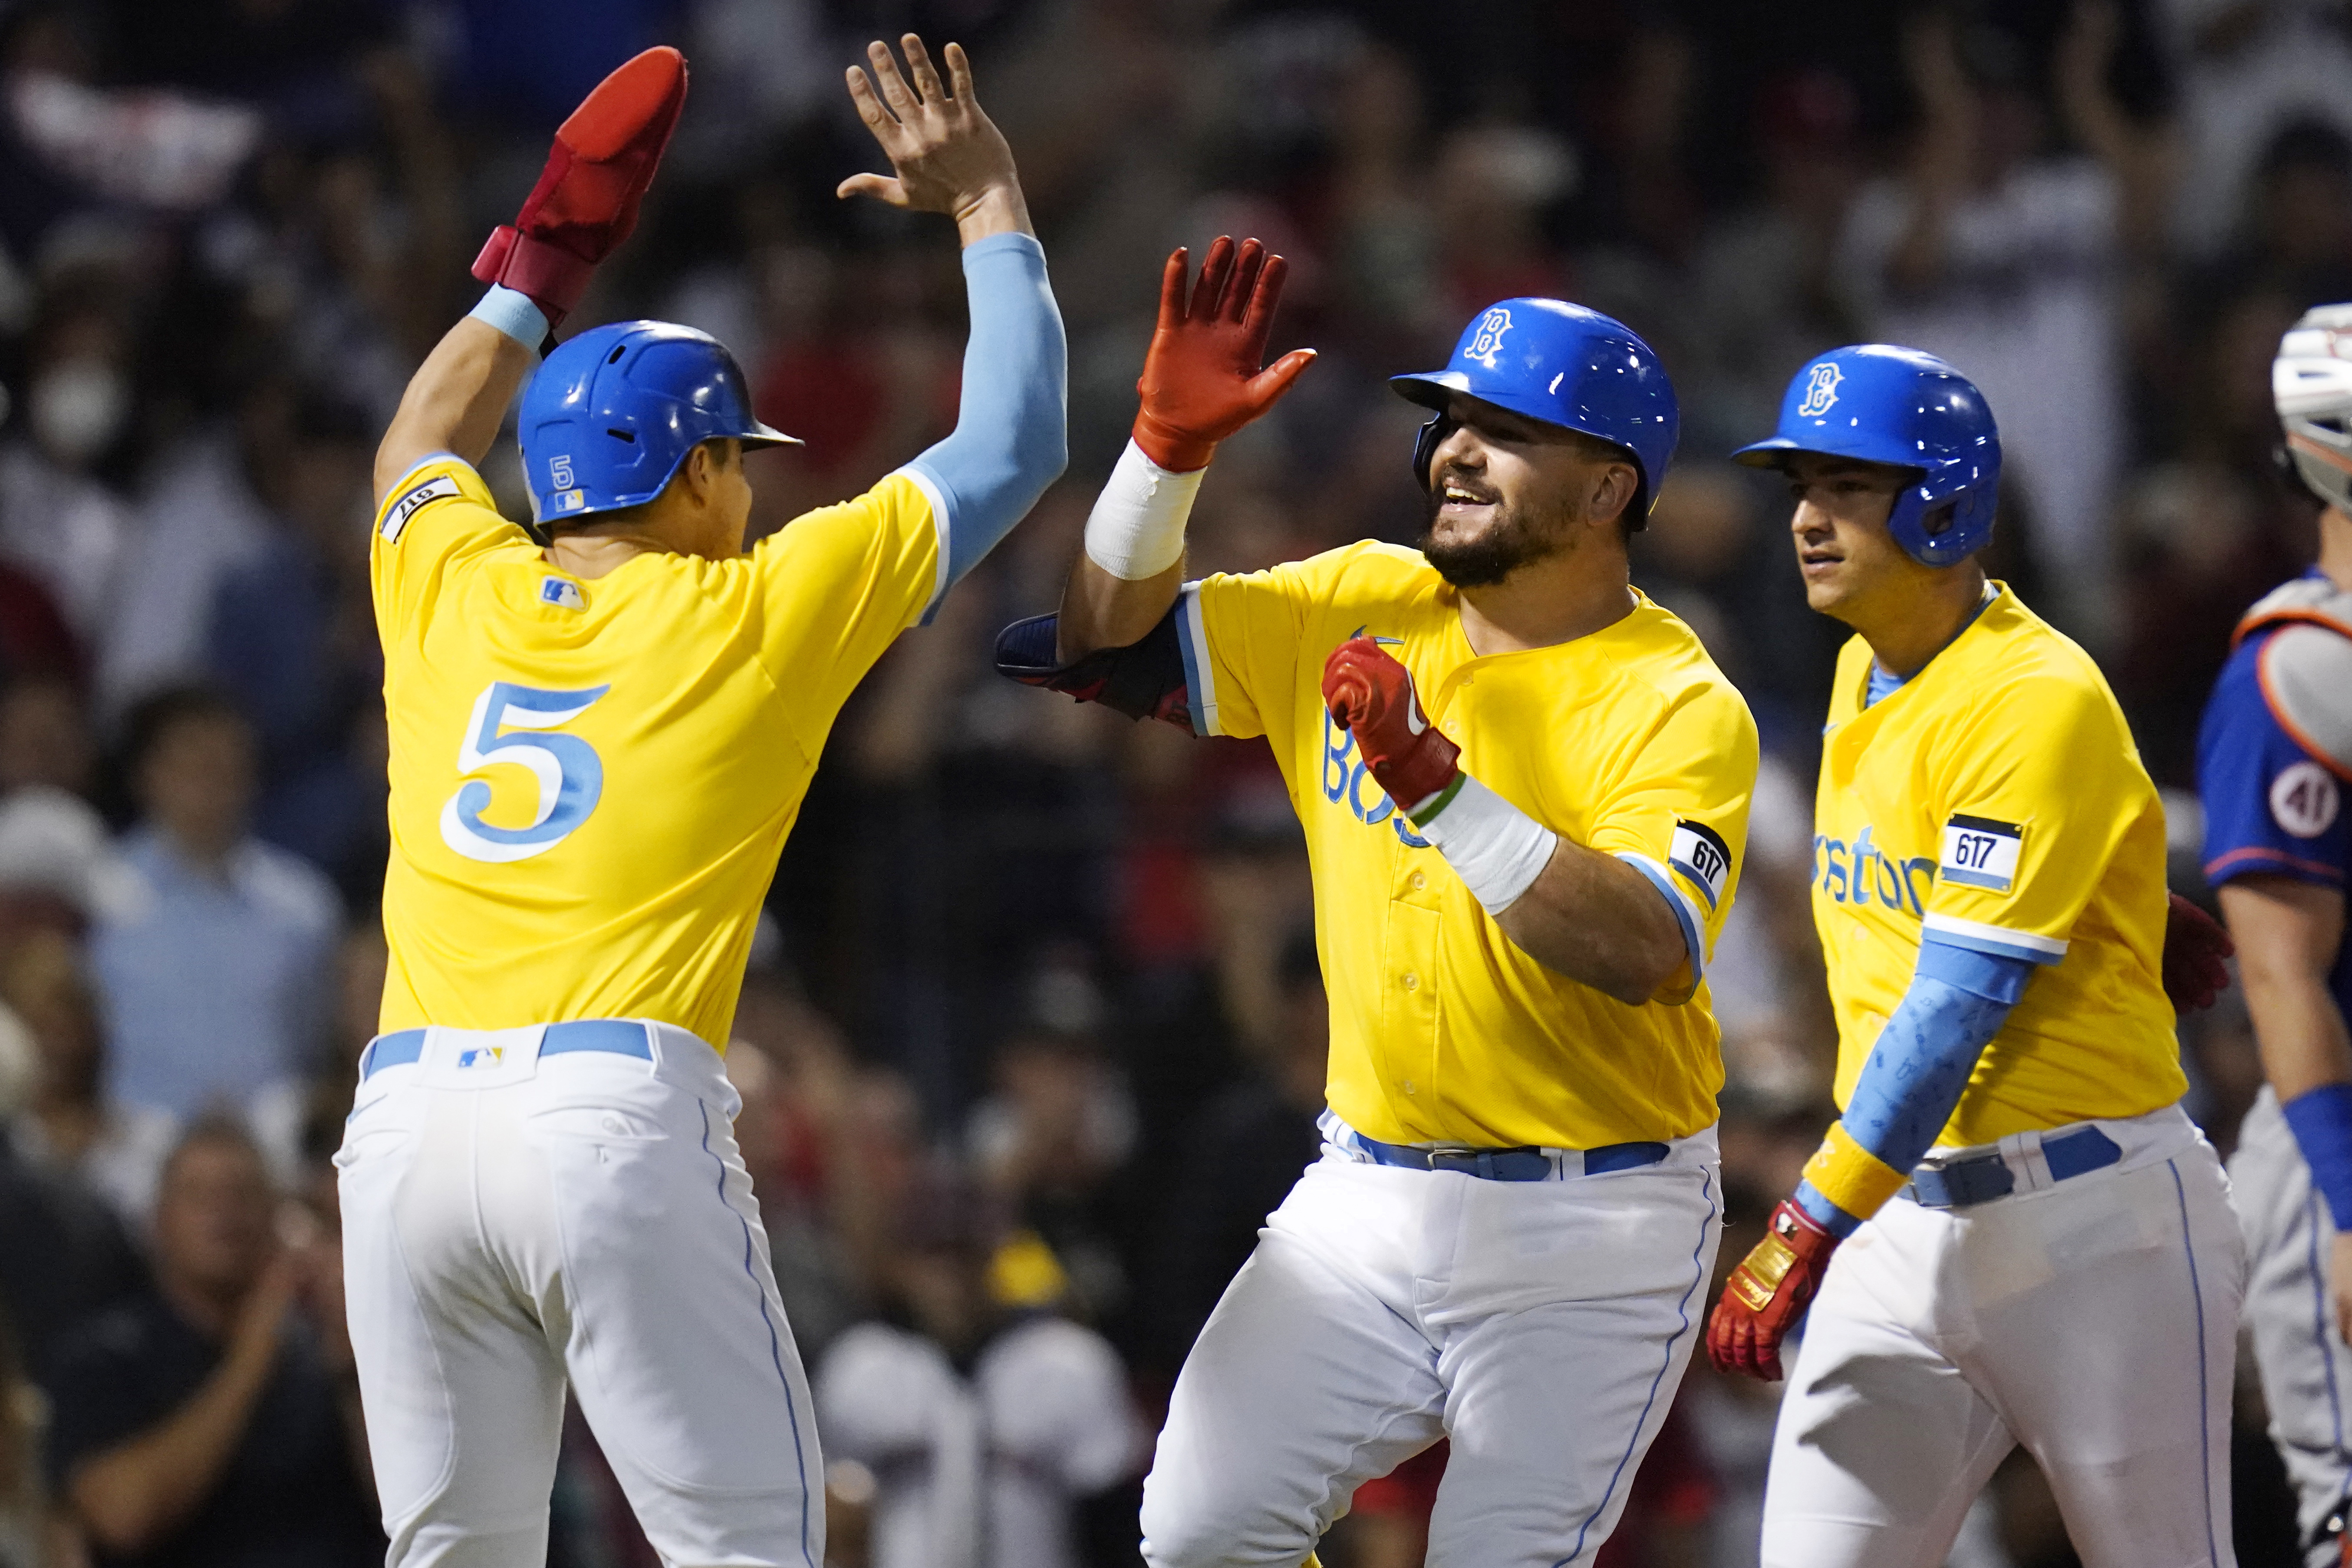 boston red sox yellow uniforms meaning